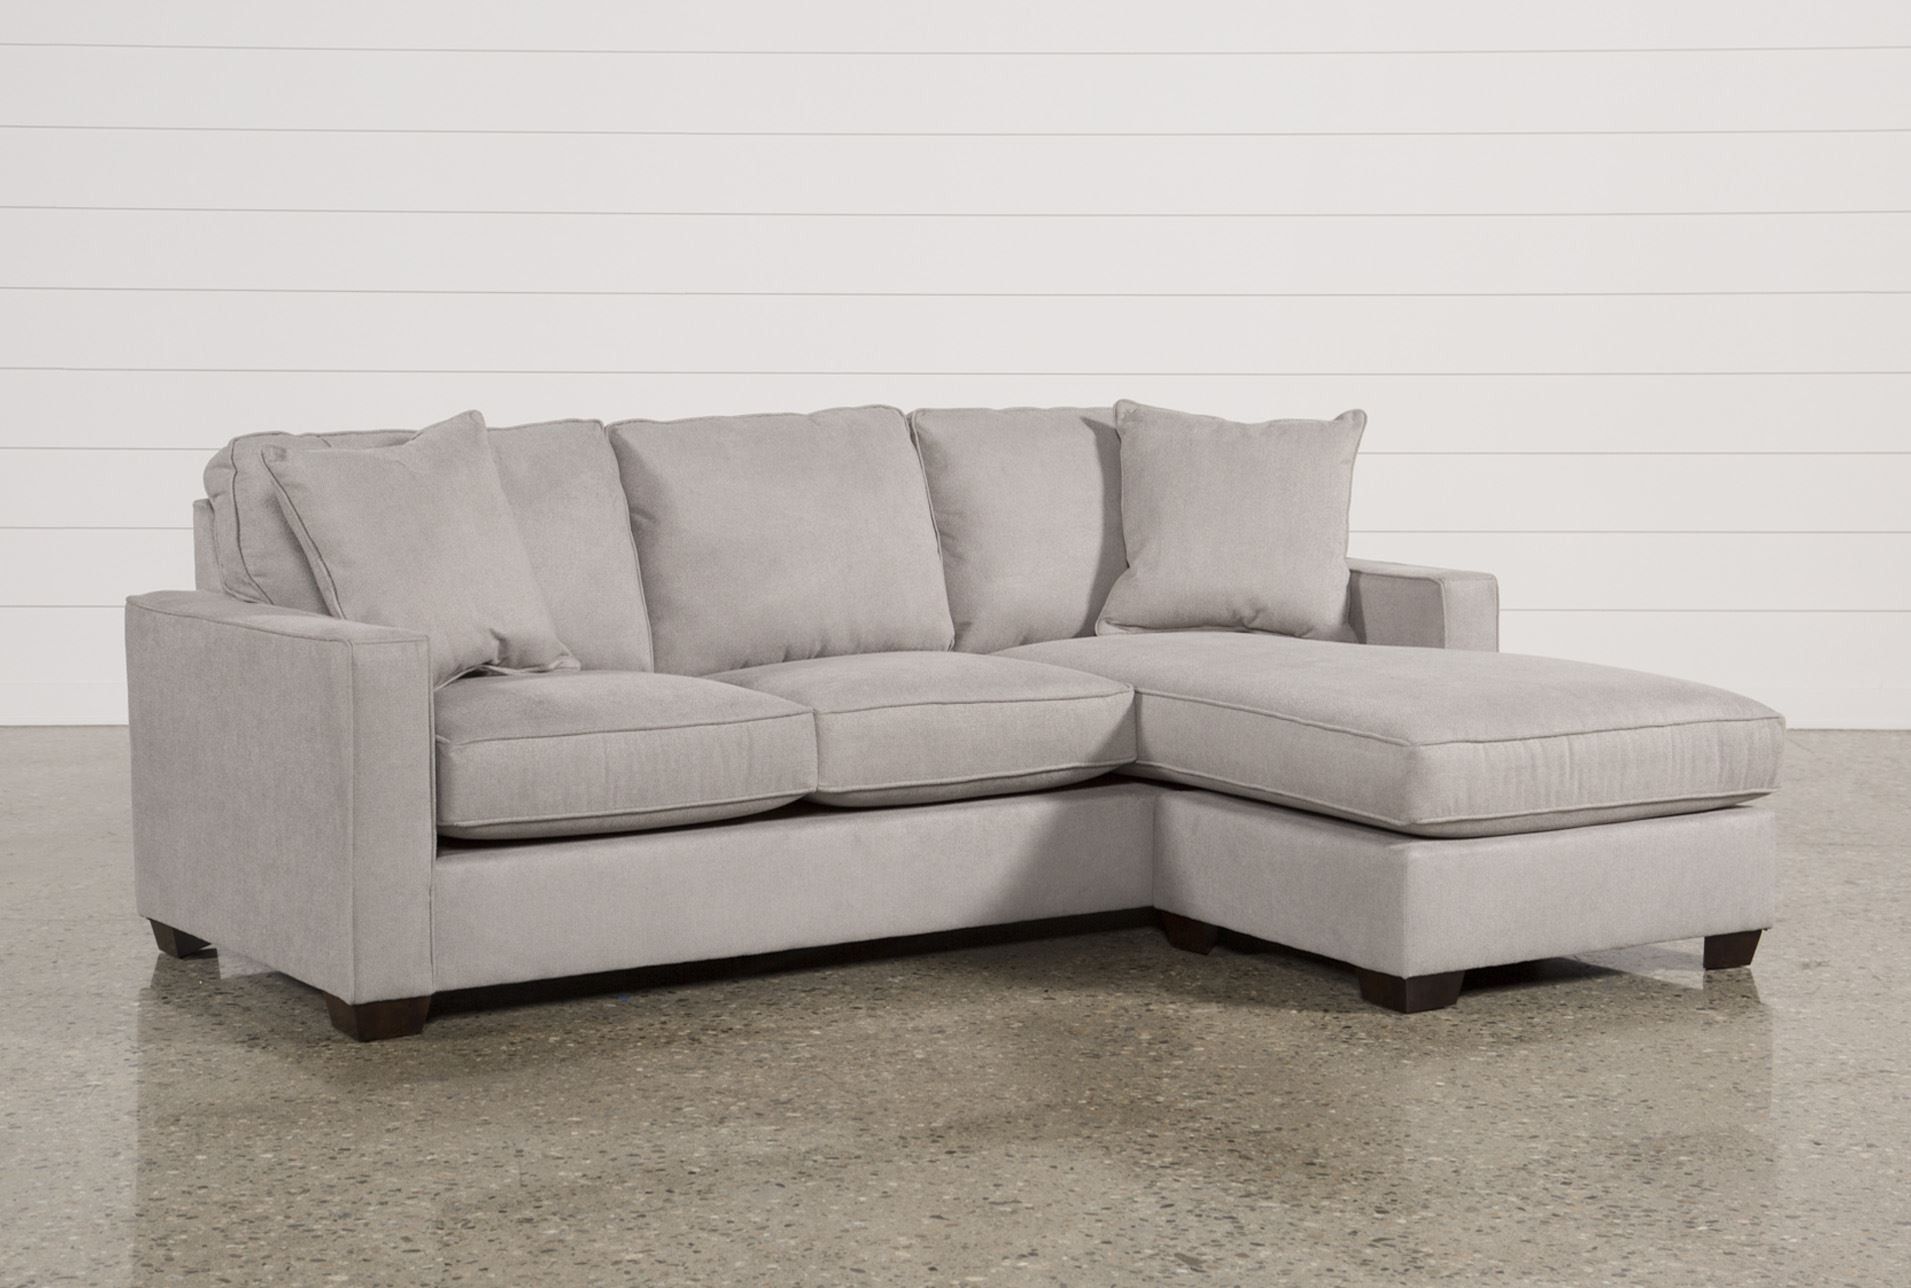 Living Spaces Sectional Sofas Kerri 2 Piece W Raf Chaise 107153 0 Inside Kerri 2 Piece Sectionals With Raf Chaise (View 8 of 30)